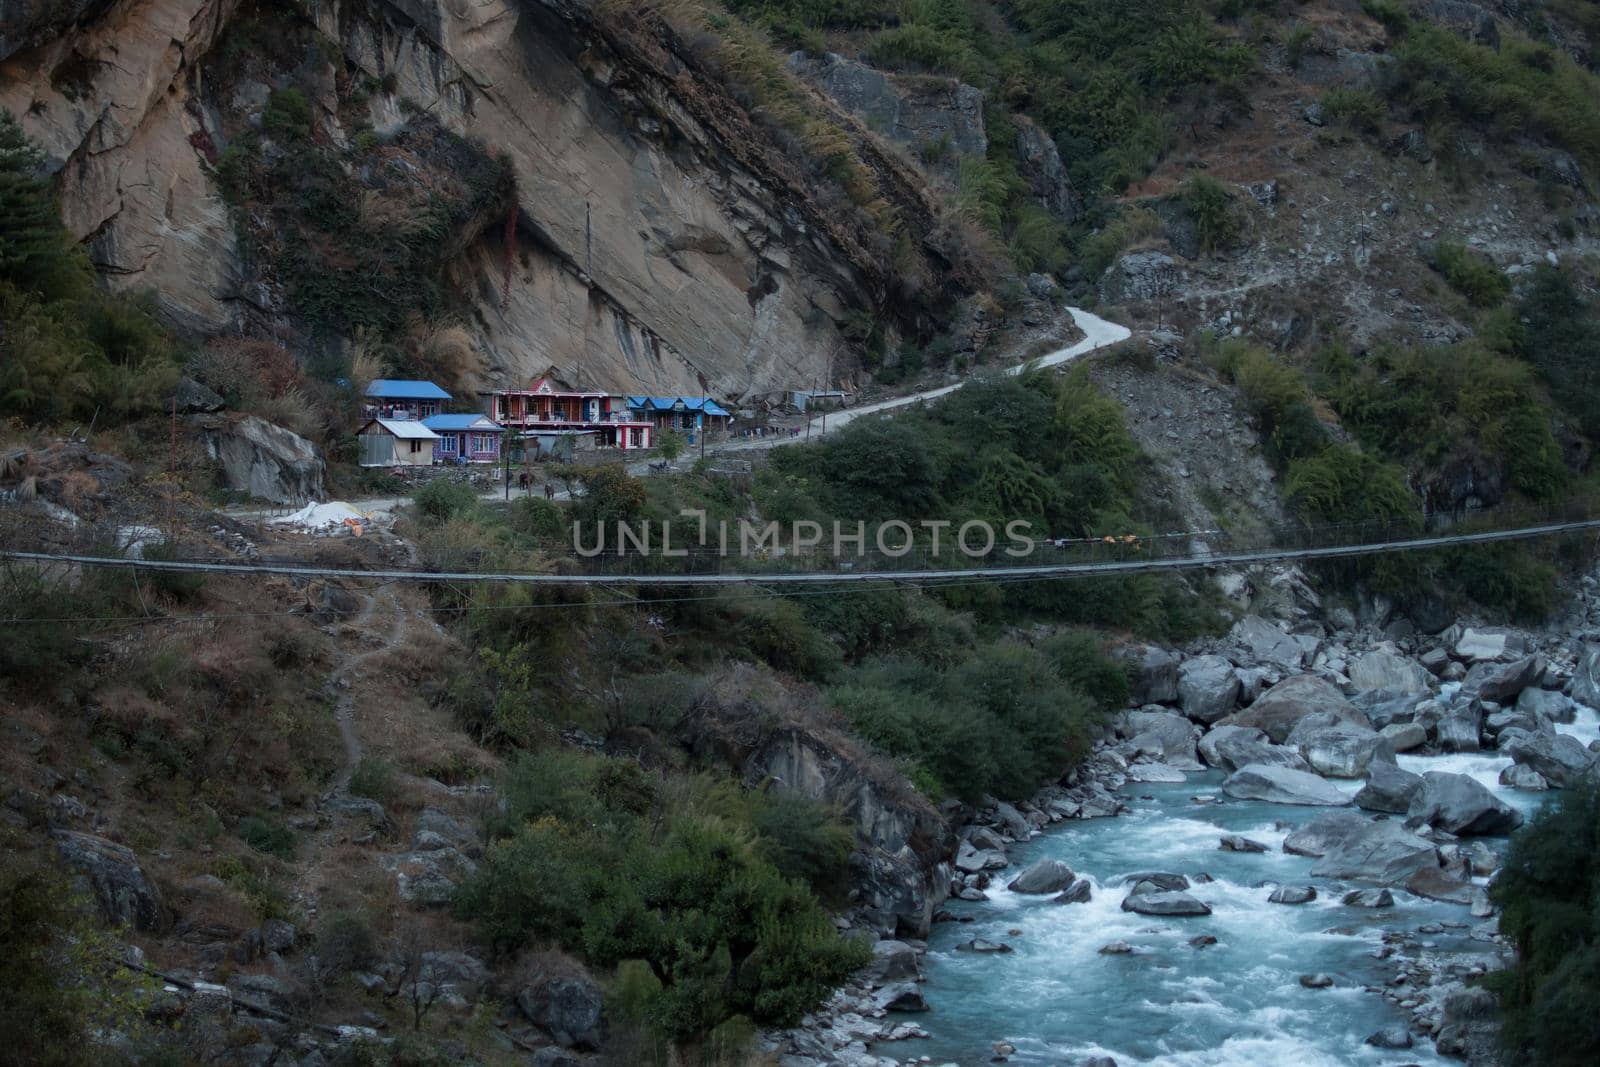 Nepalese mountain village by a suspension bridge over the Marshyangdi river gorge valley, Annapurna circuit, Himalaya, Nepal, Asia